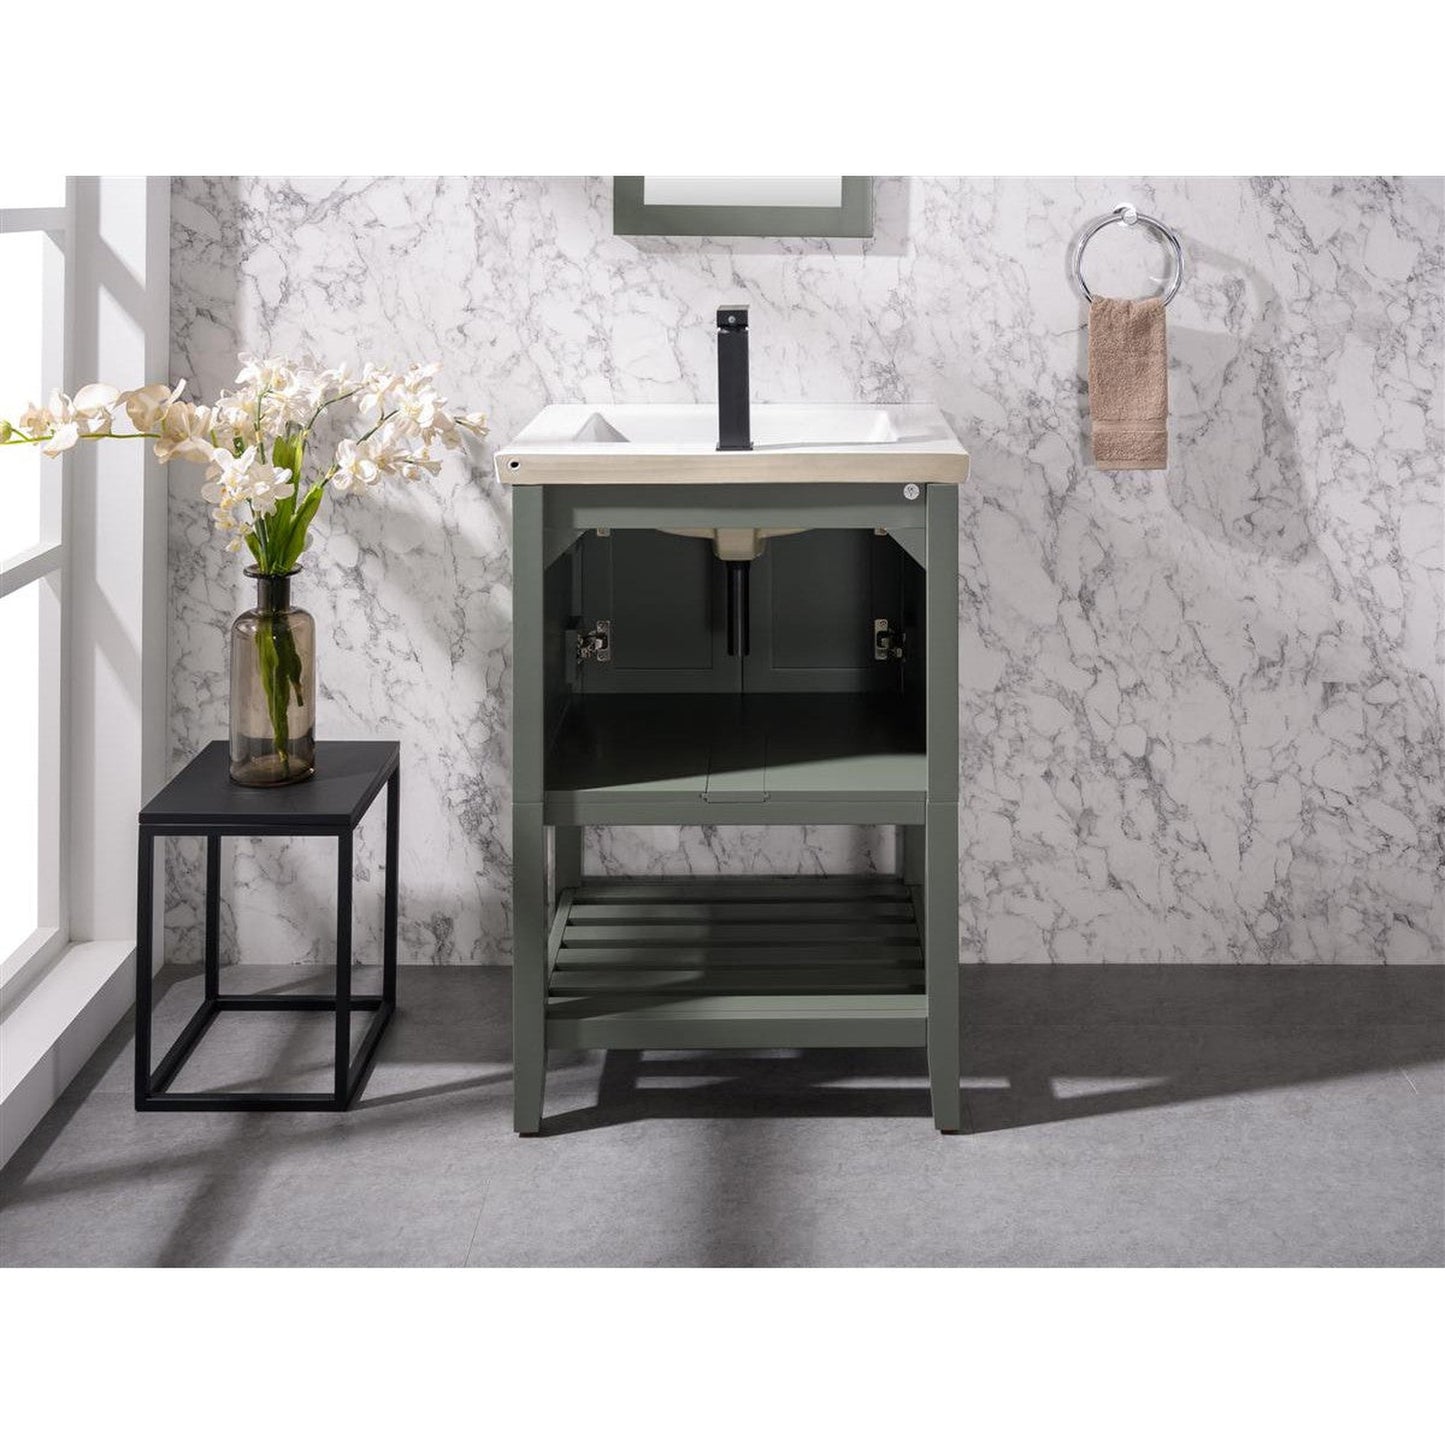 Legion Furniture WLF9024 24" Pewter Green Freestanding Vanity Cabinet With White Ceramic Top and Sink